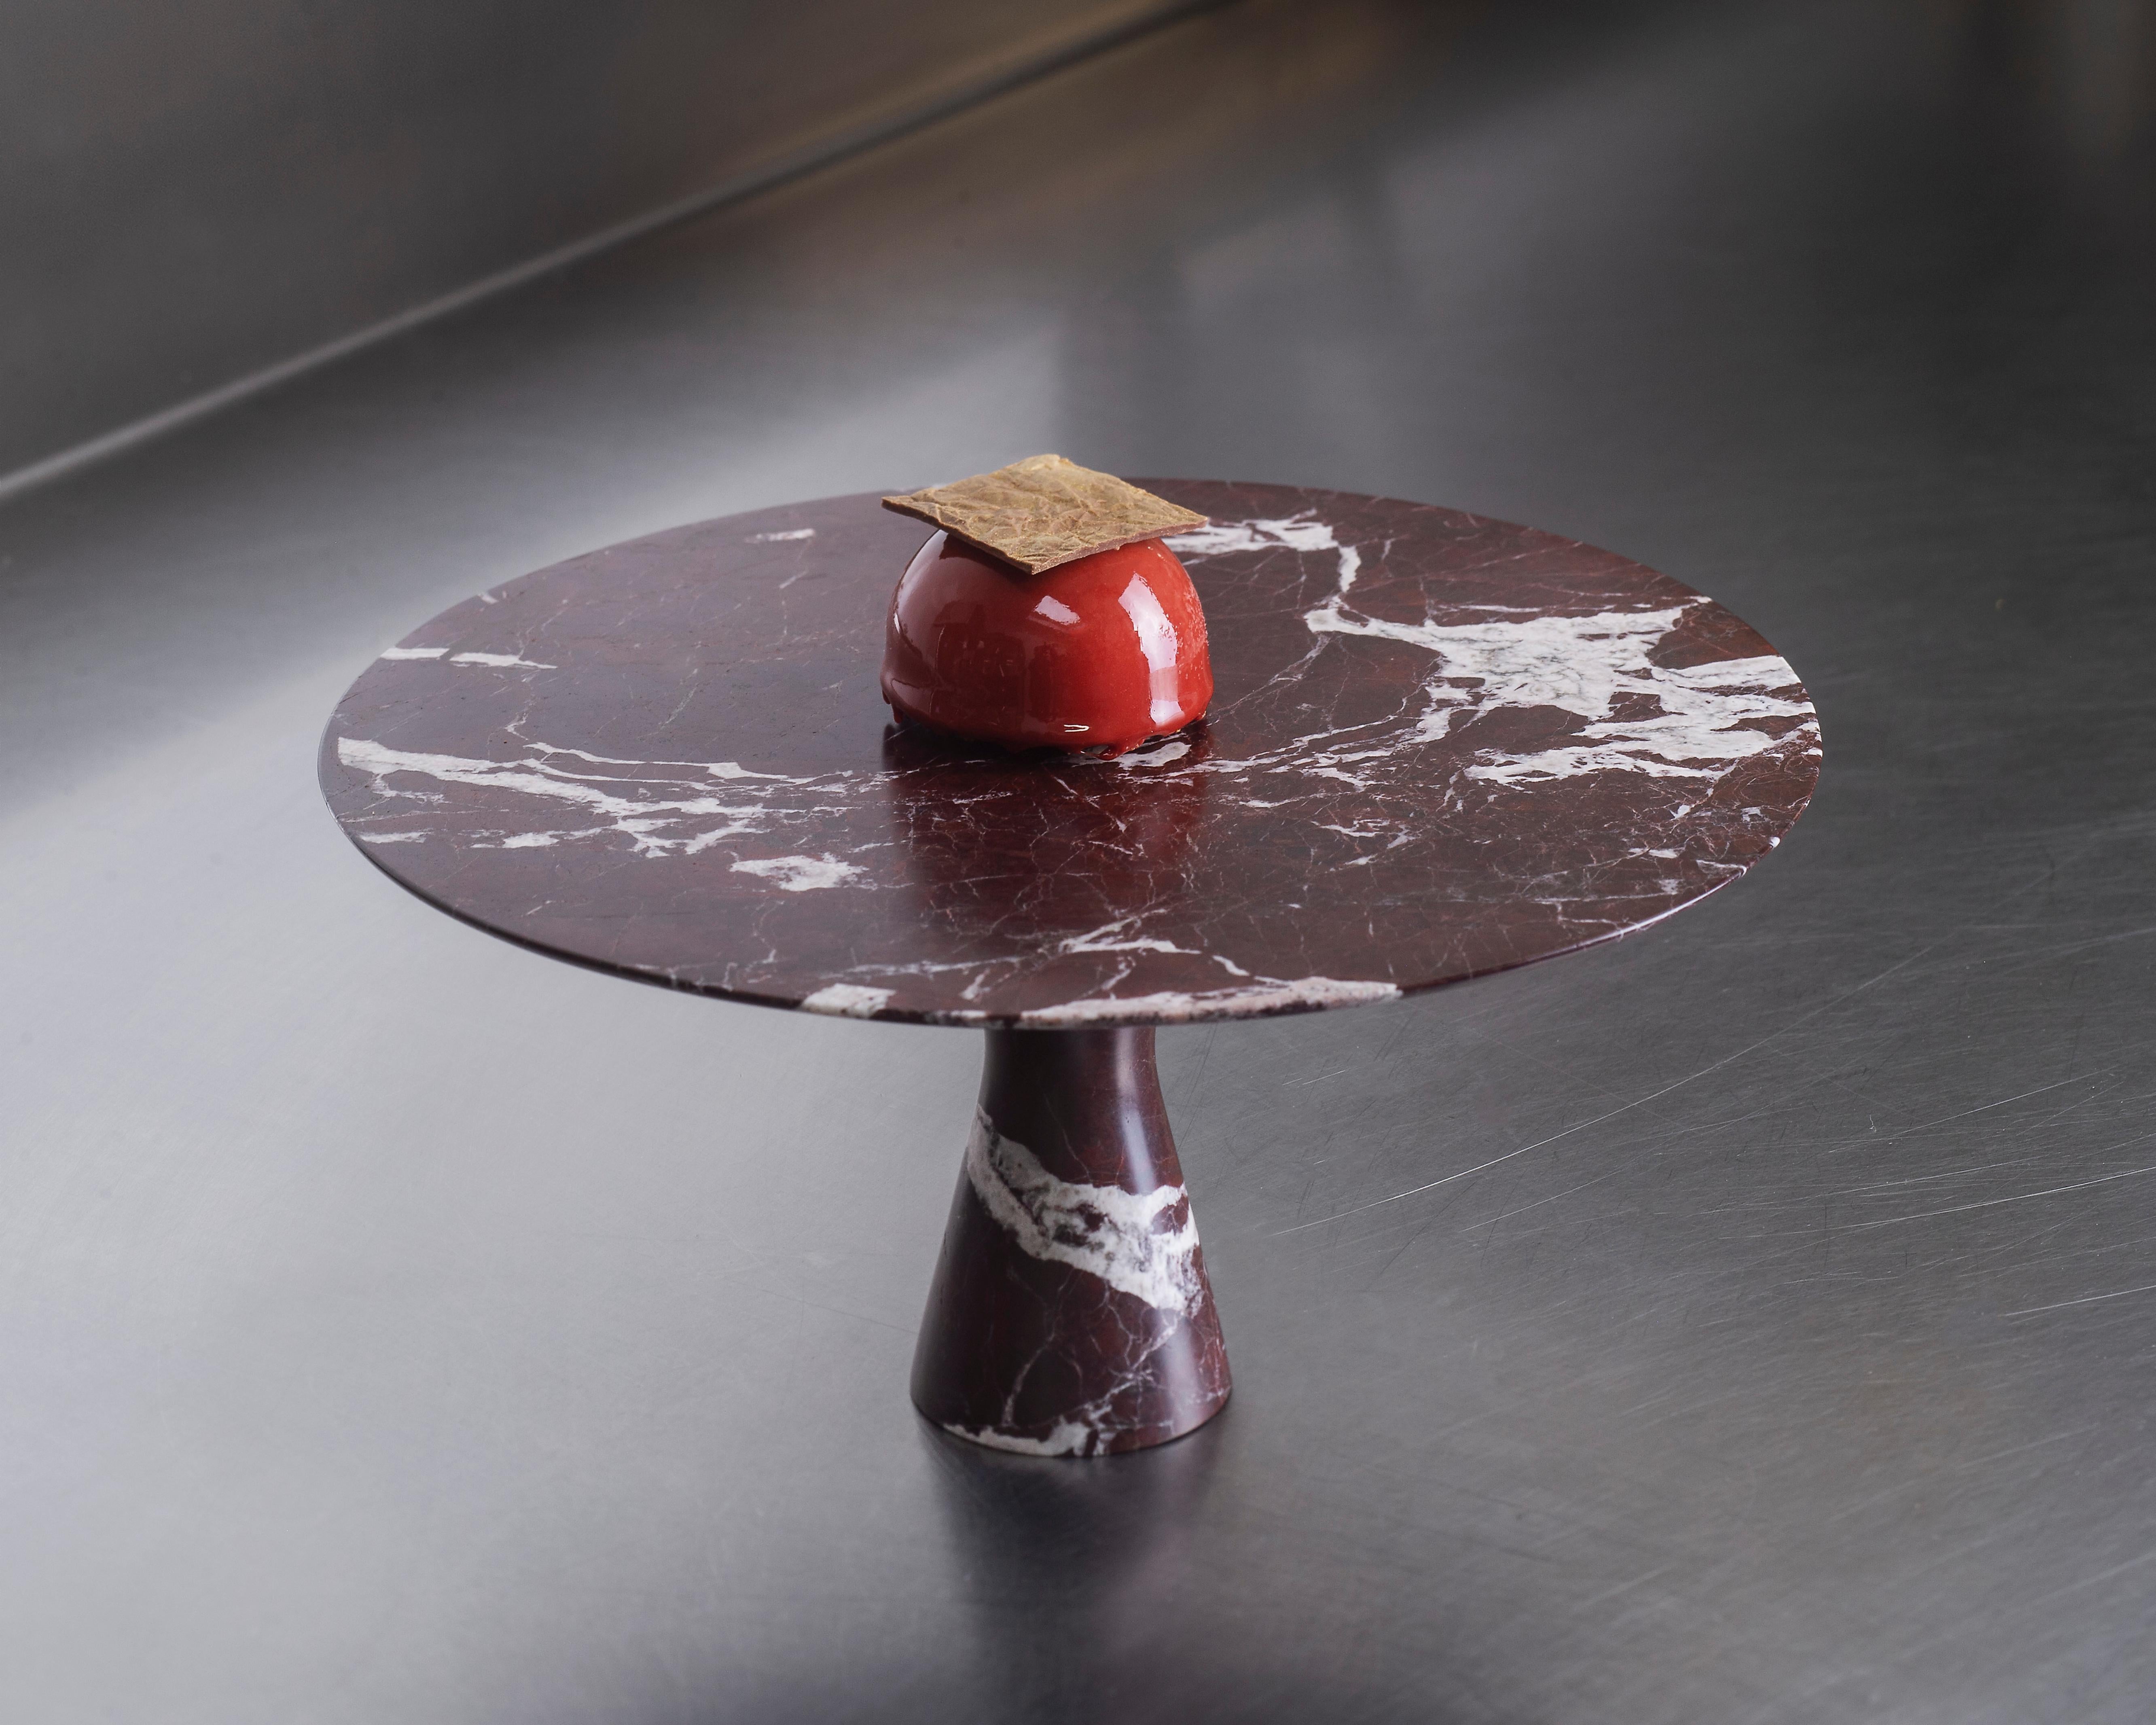 Rosso Lepanto Refined Contemporary Marble Serving Plate
Dimensions:
Ø 32 x 2 cm H
Ø 32 x 15 cm H
Ø 24 x 22 cm H
Angelo O is the little brother and scale model of the natural stone table Angelo M. Angelo O can ideally be used as a cake plate, cheese